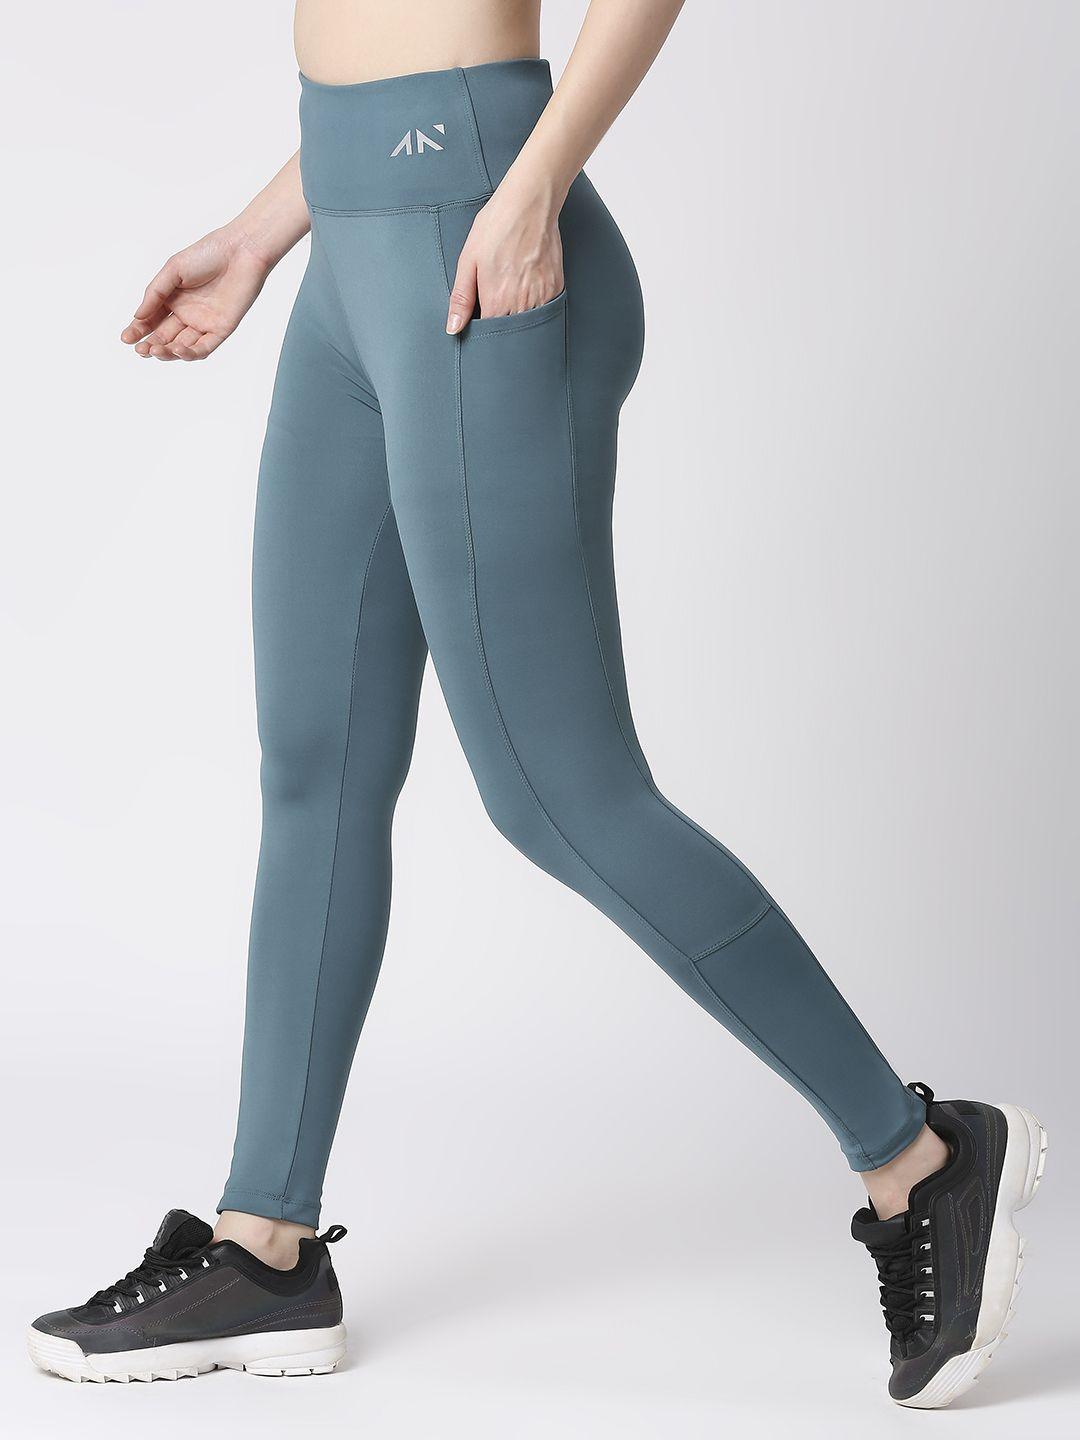 aesthetic nation women dry-fit training tights